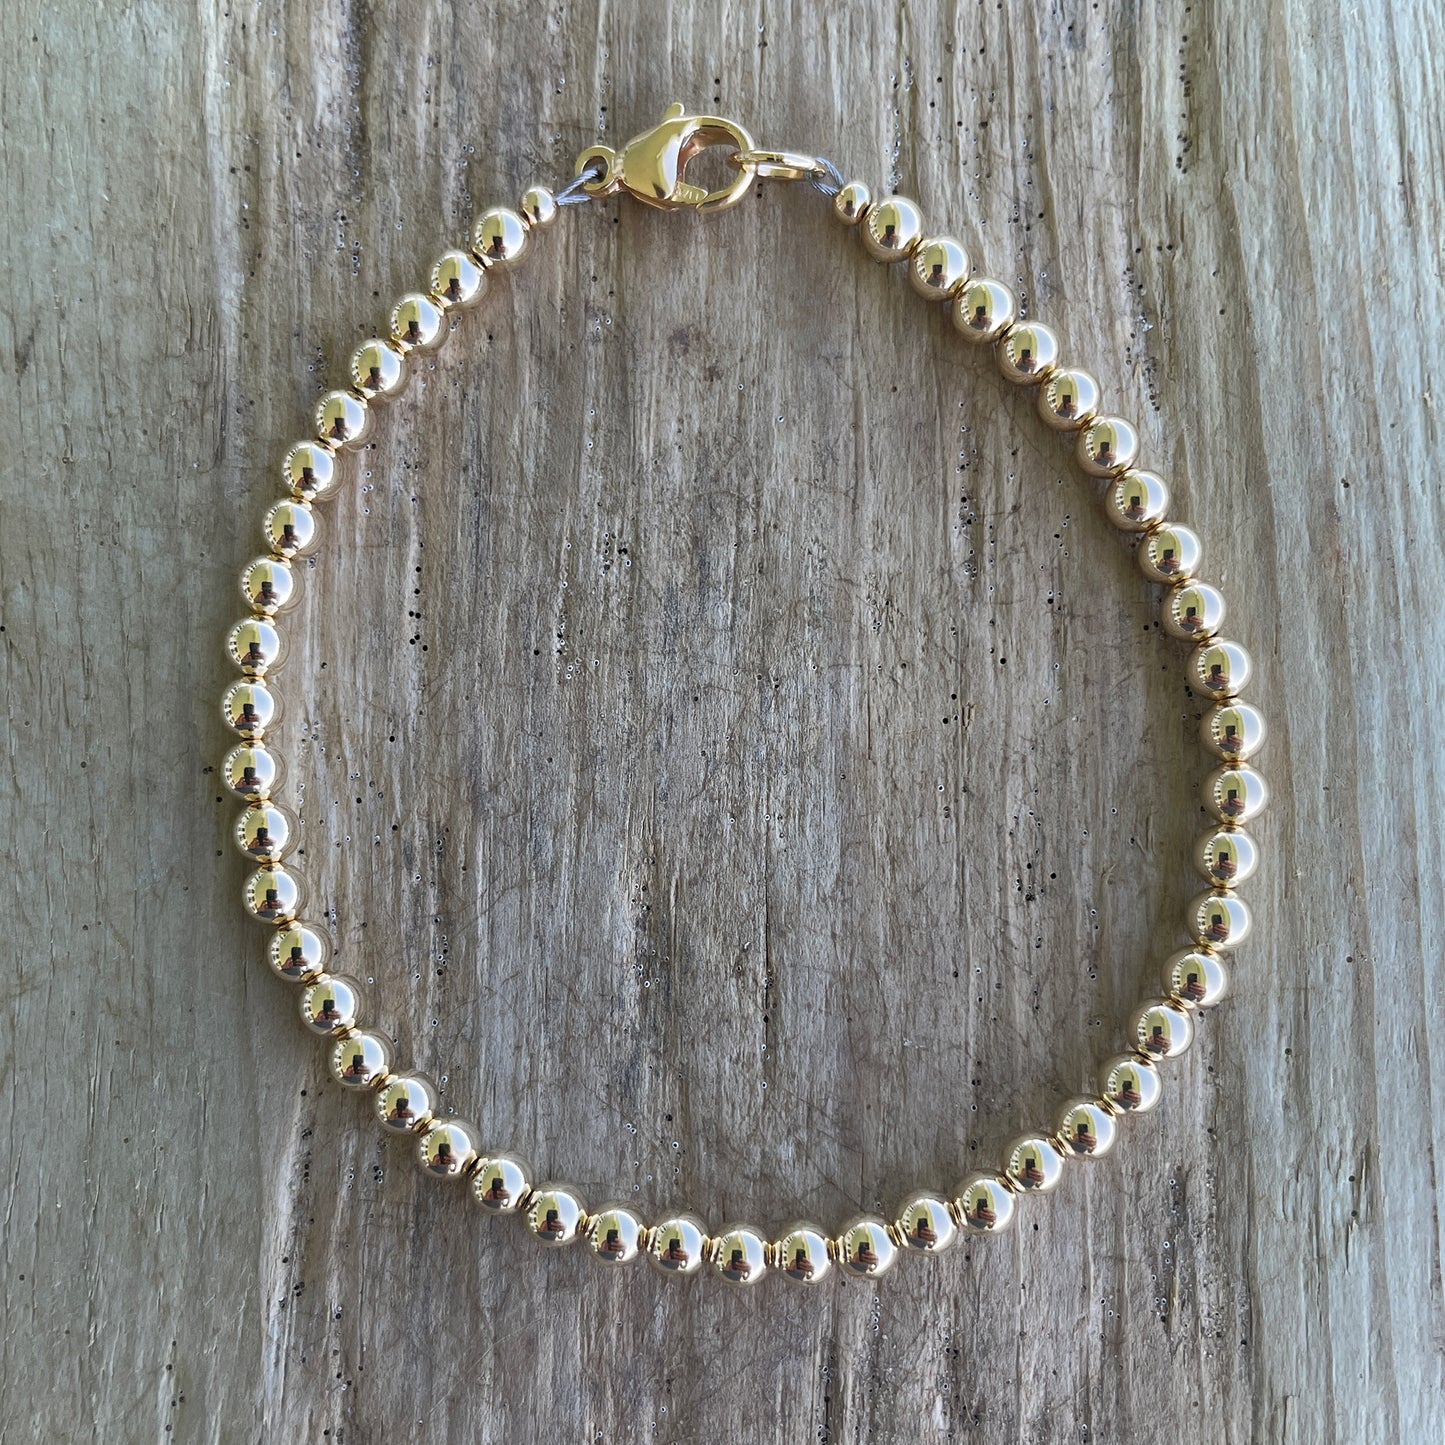 4mm 14K Gold Filled Bead Bracelet with Clasp